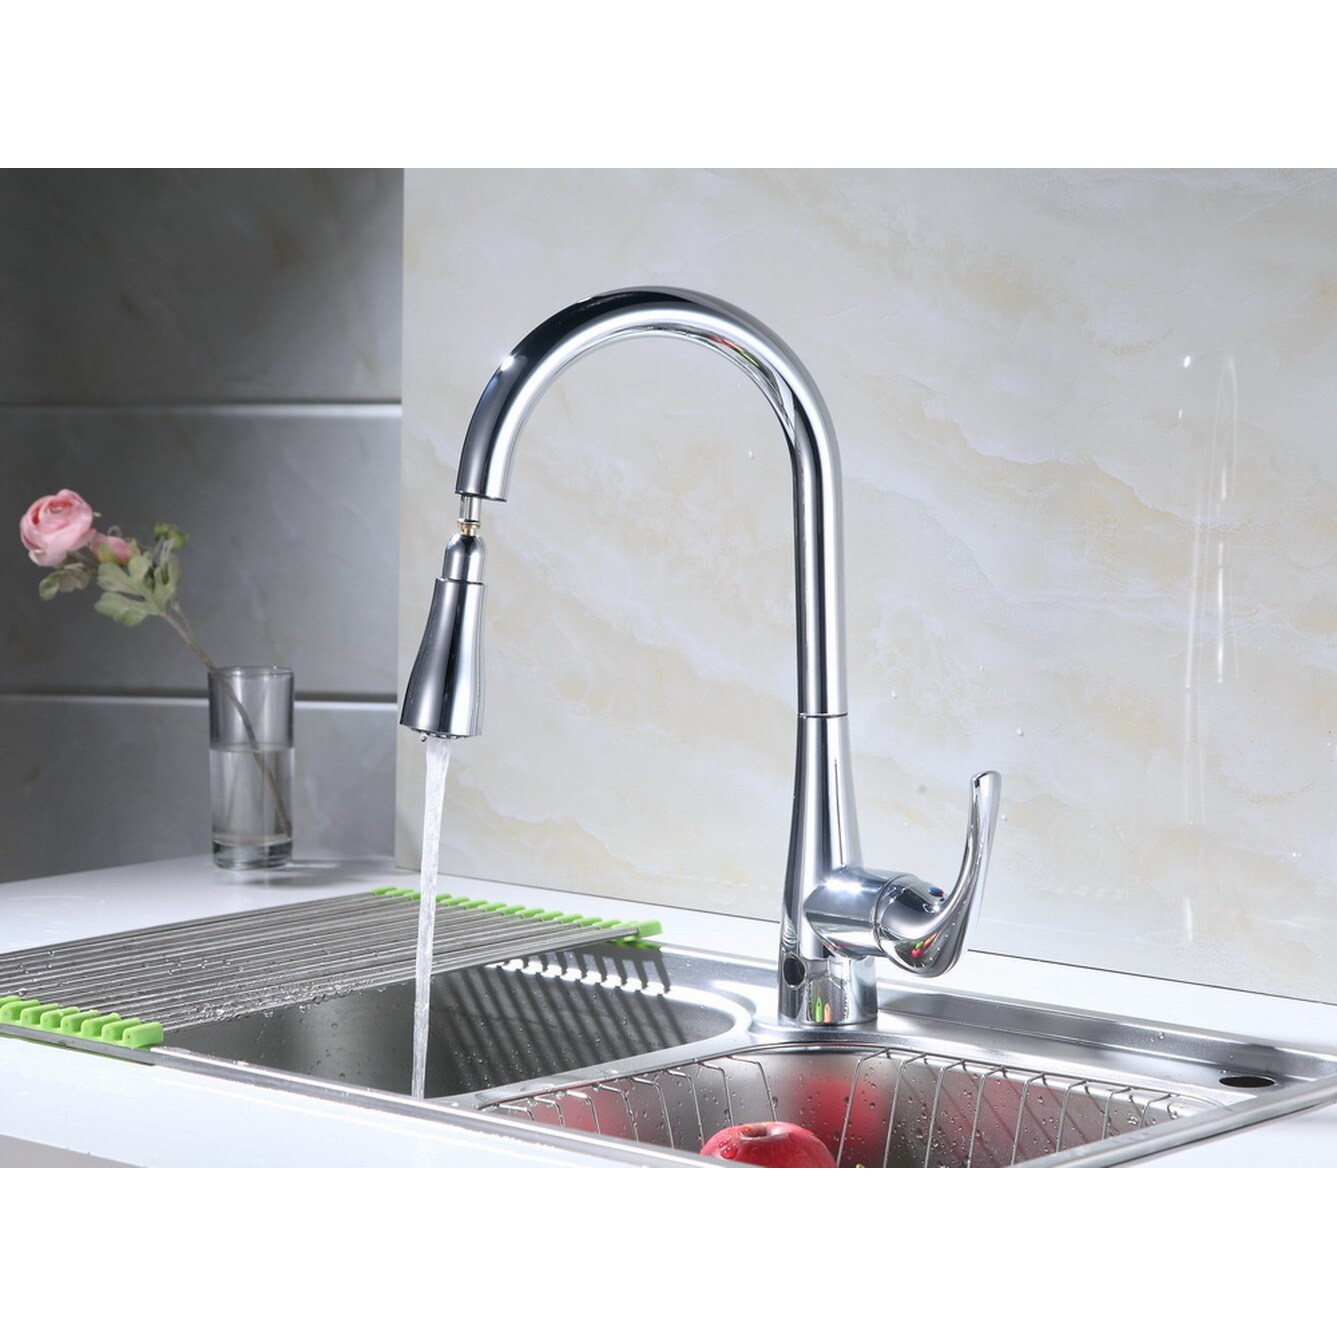 Single Handle Deck Mounted Pull-Down Automatic Sensor Kitchen Faucet - Chrome/Clear